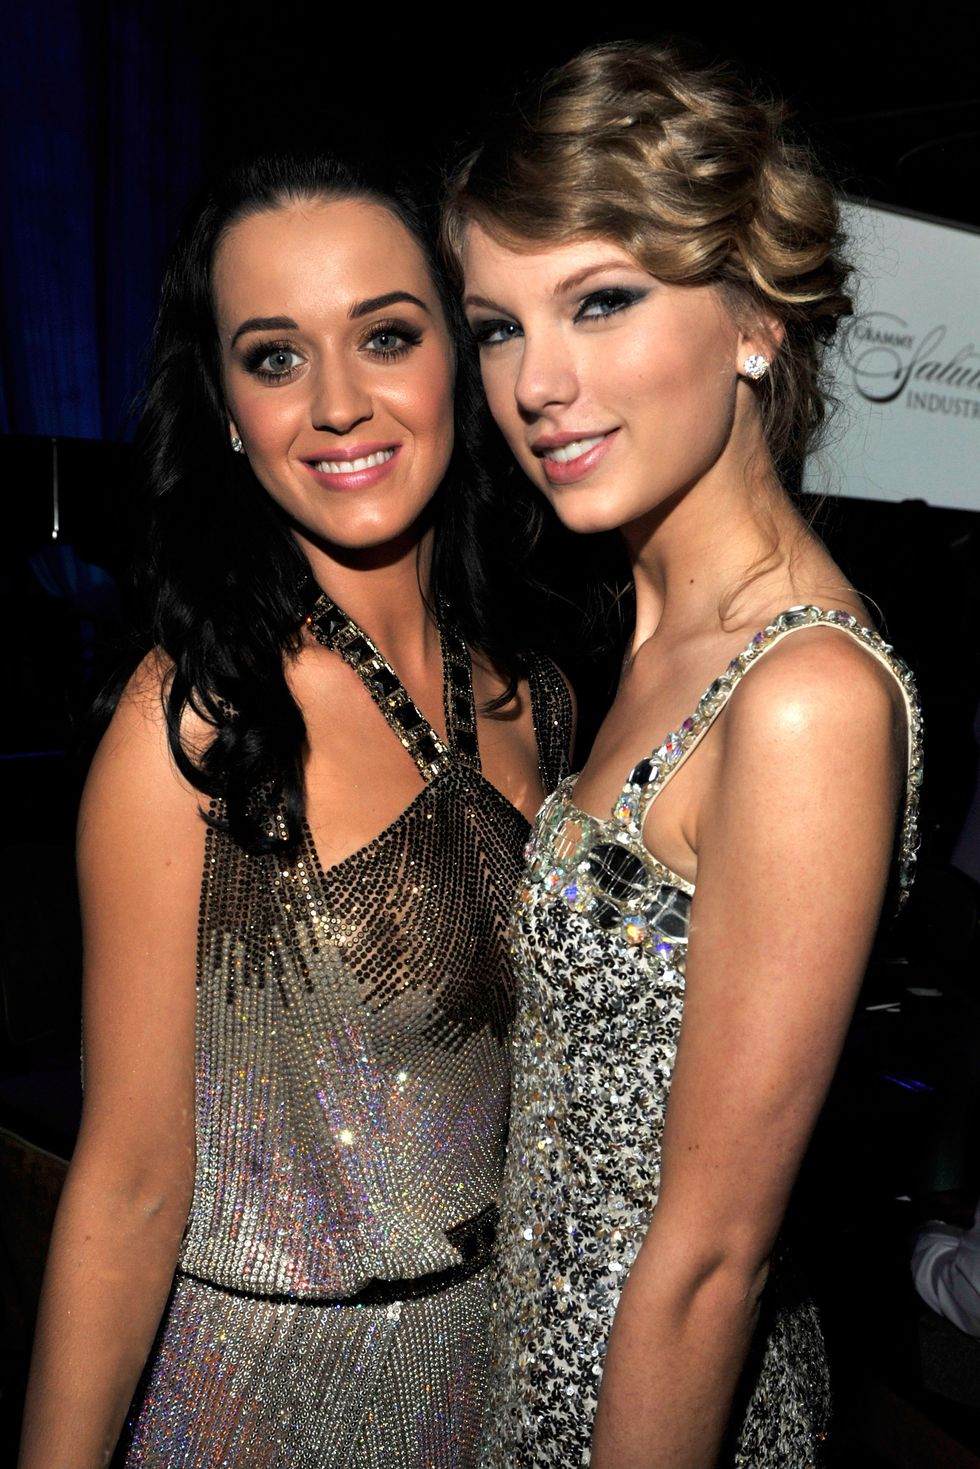 katy perry and taylor swift at the 52nd annual grammy awards   salute to icons honoring doug morris held at the beverly hilton hotel on january 30, 2010 in beverly hills, california